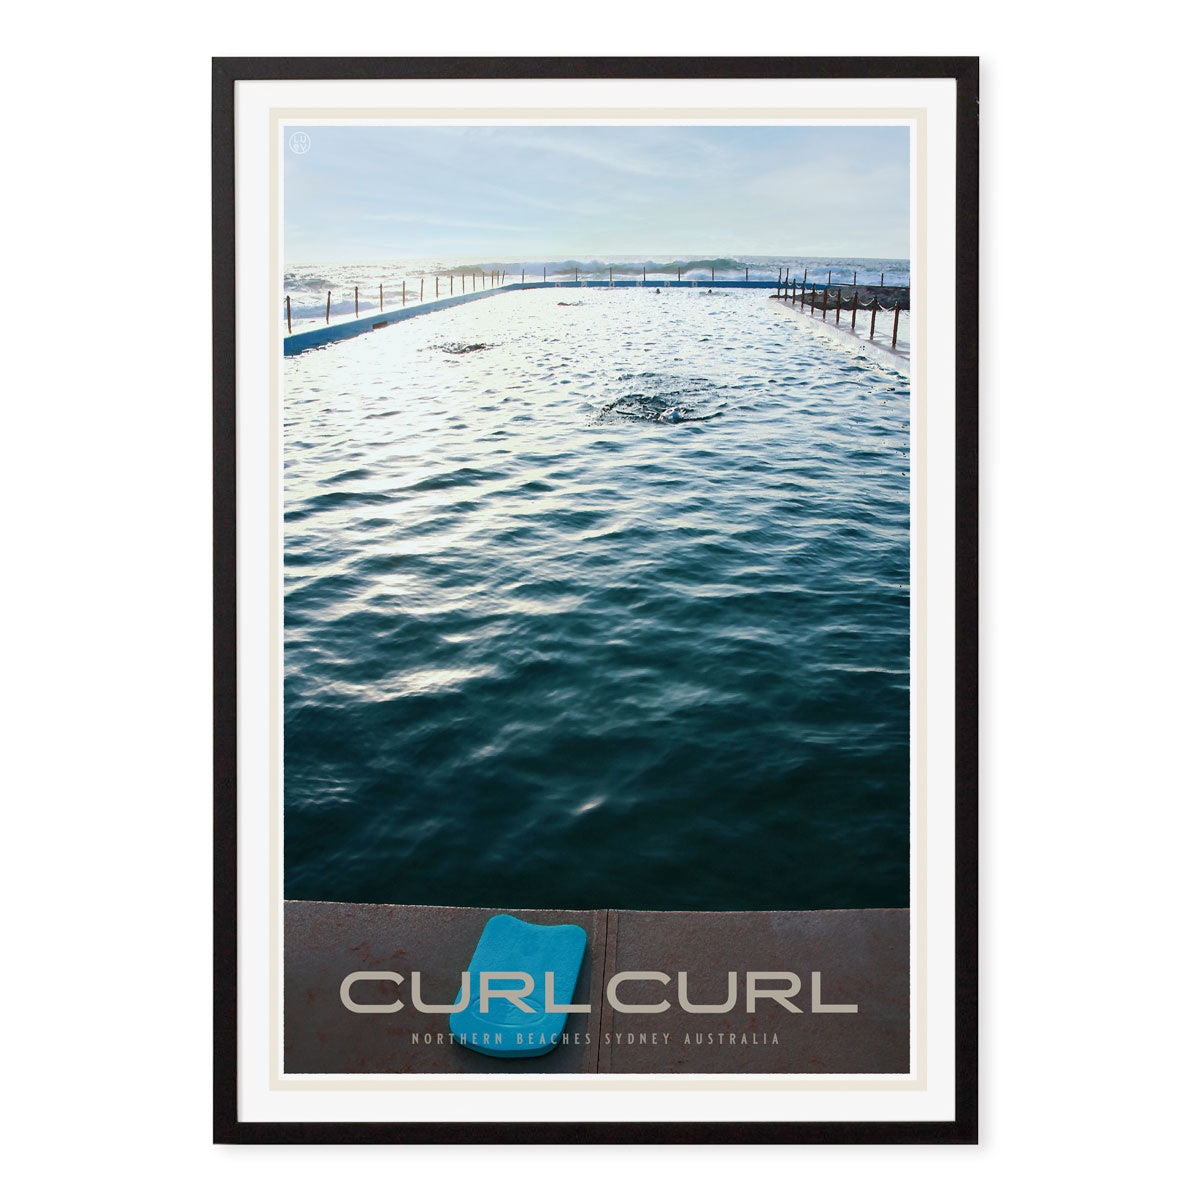 Curl curl pool retro vintage travel poster print in black frame from places we luv